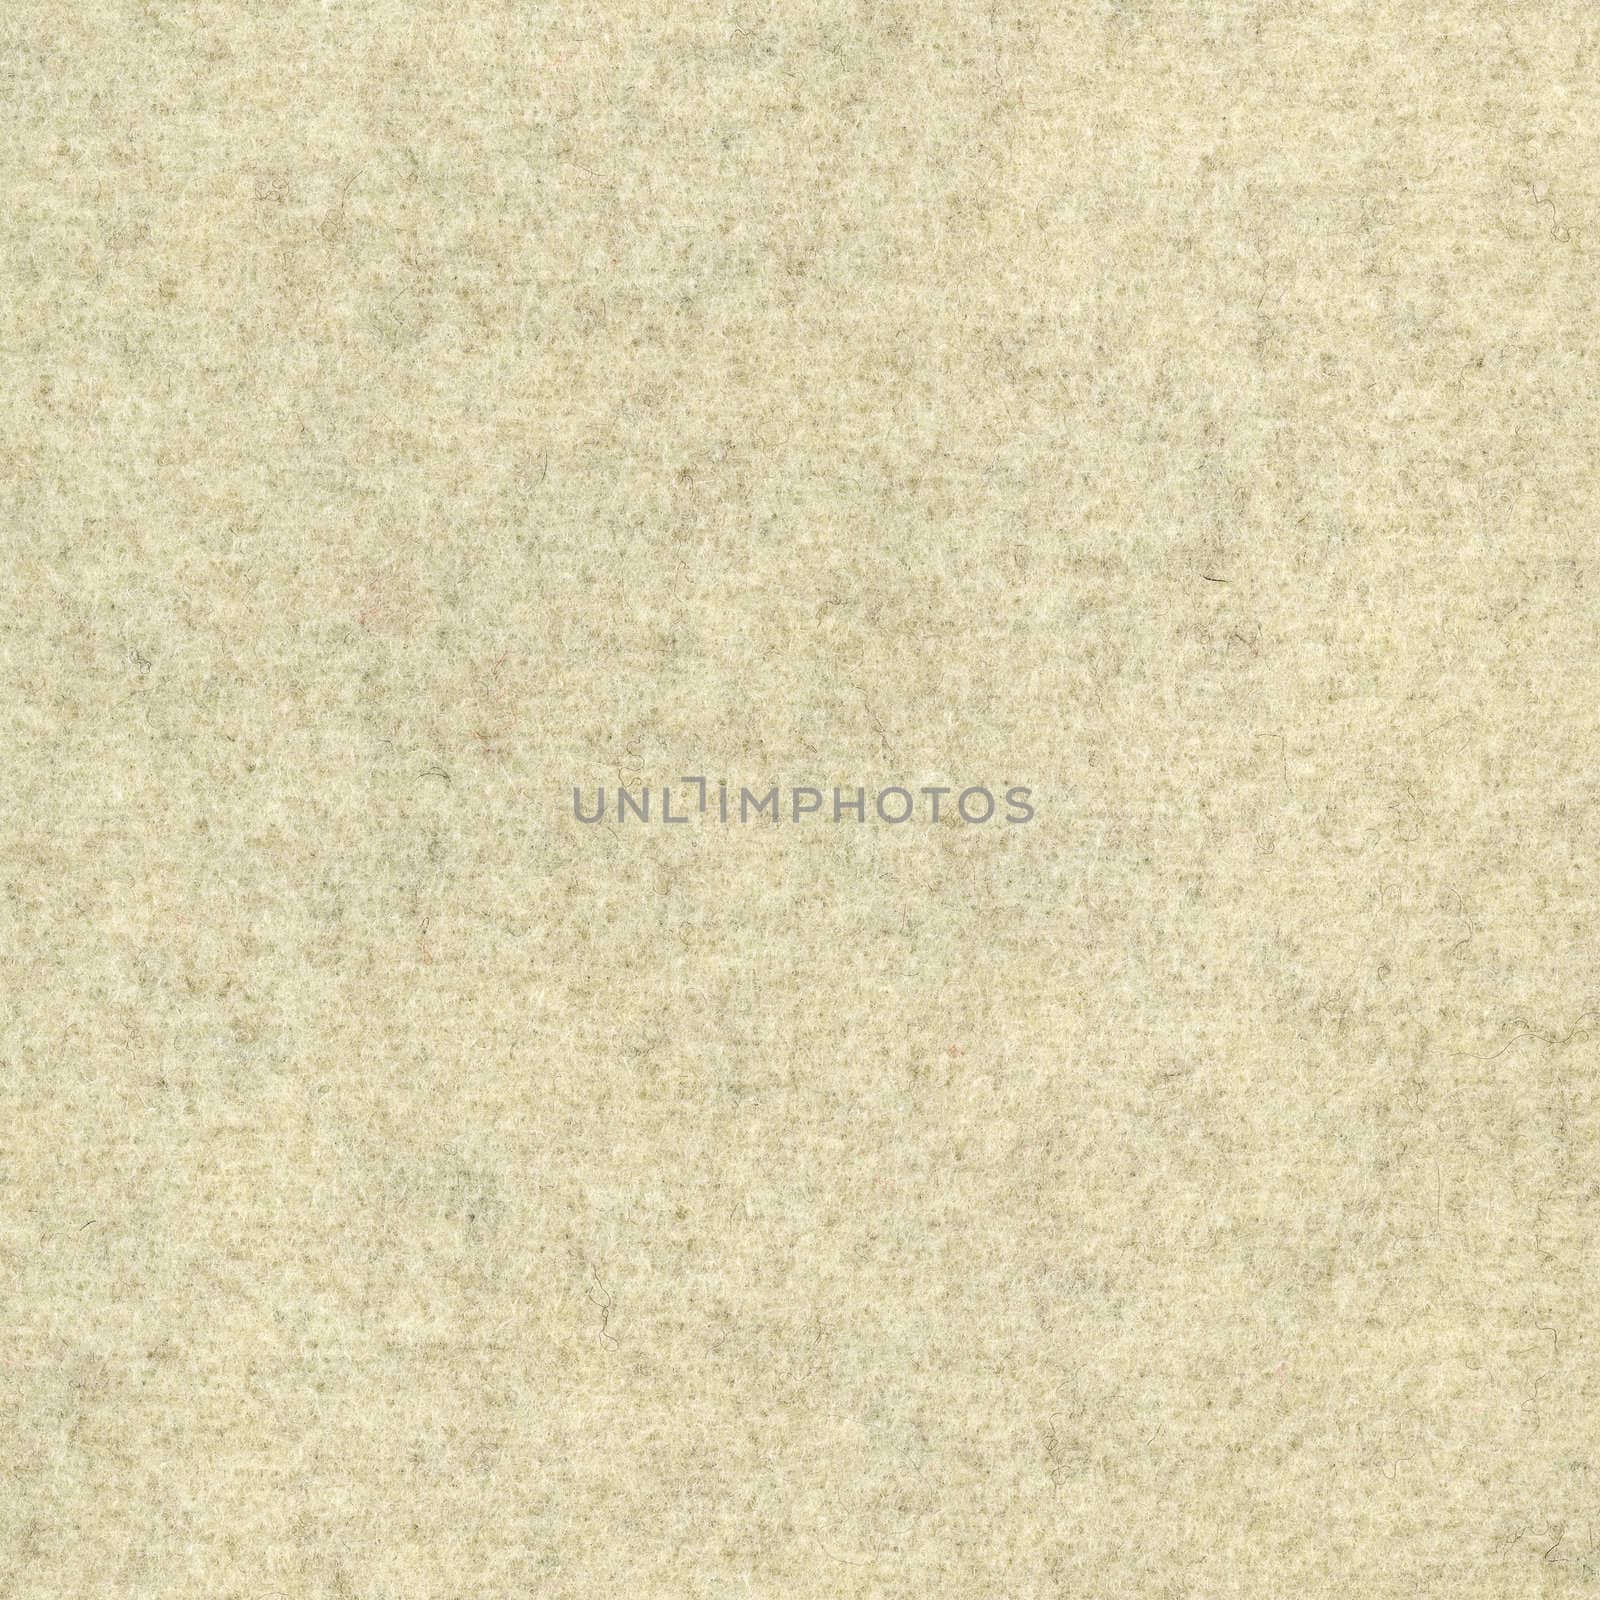 white wool felt texture - soft non-woven cloth background